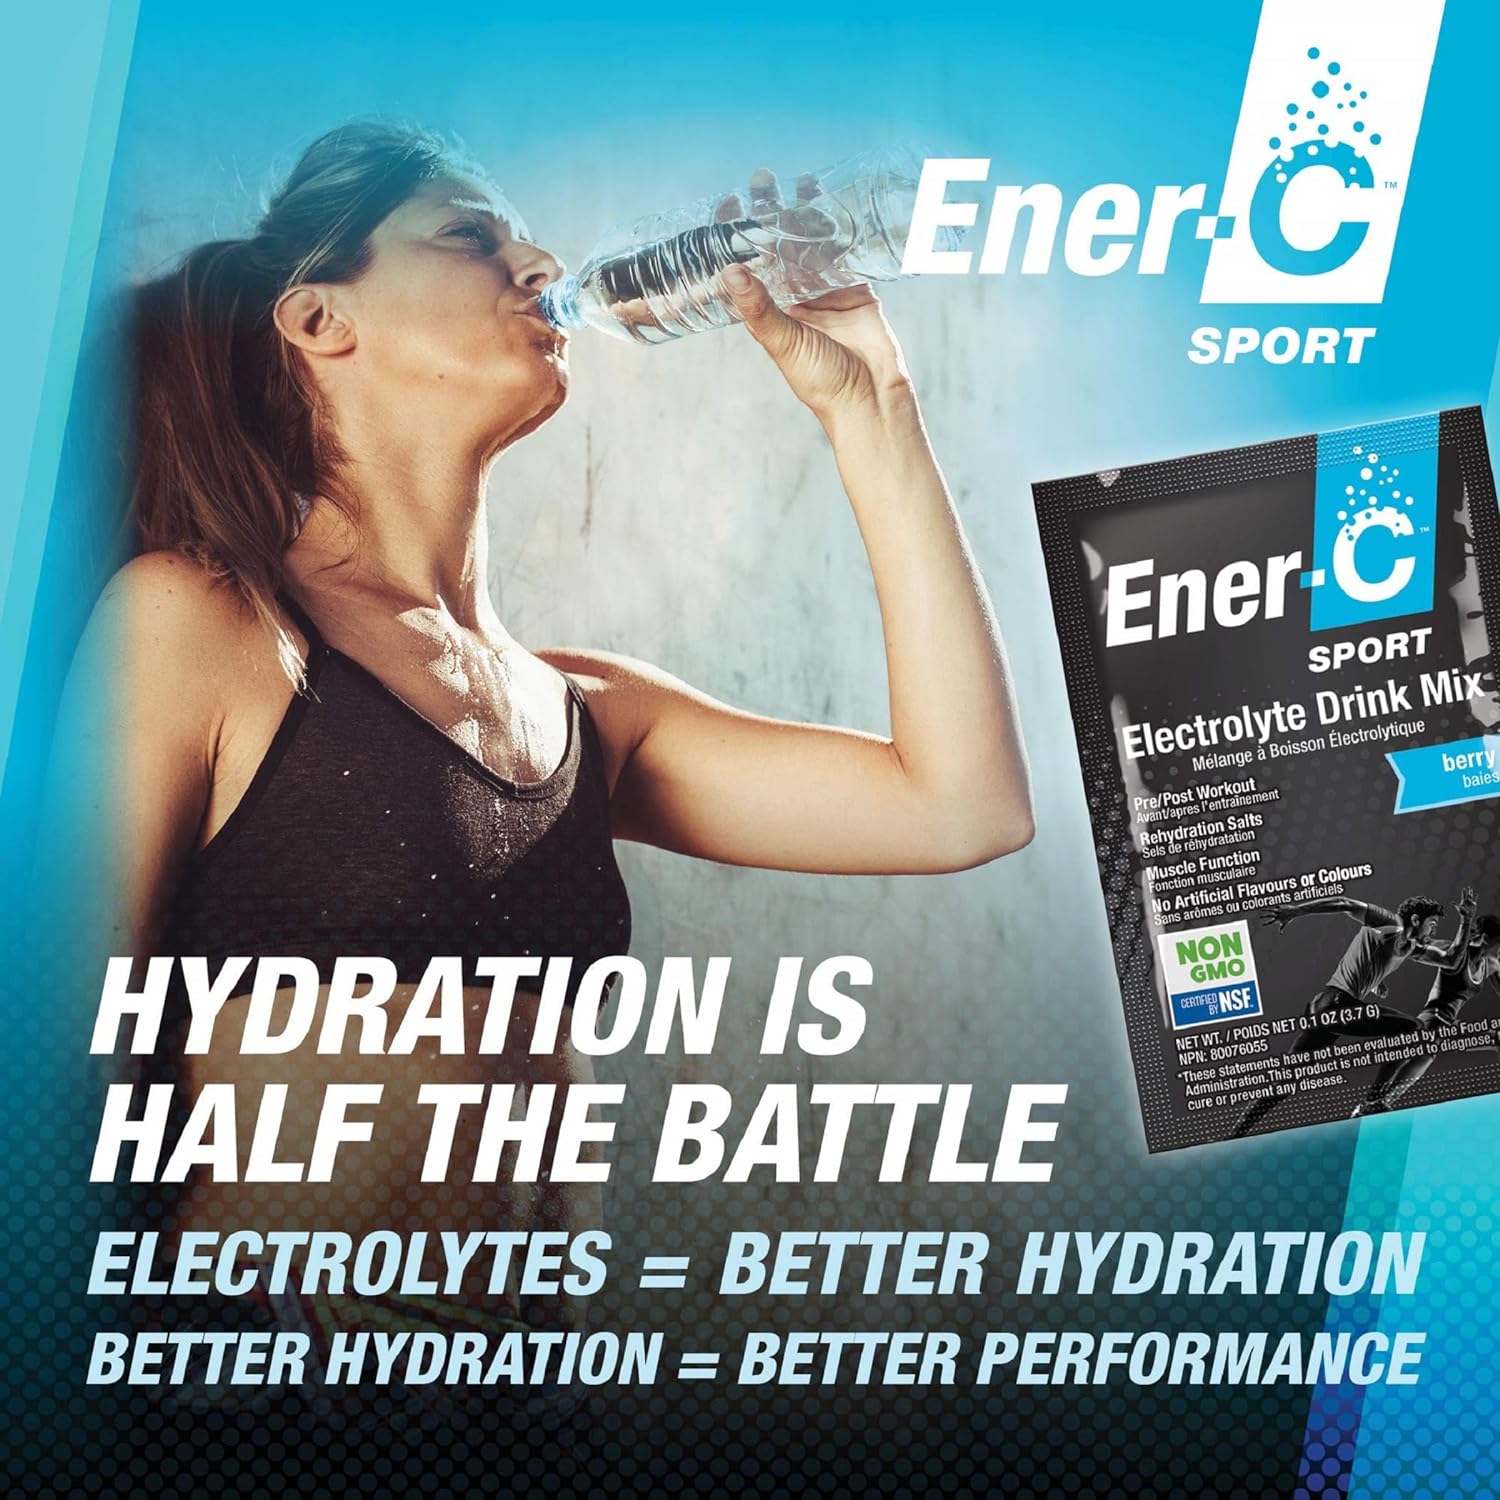 Ener-C Sport Electrolyte Hydration Drink Mix Powder Vitamin C Magnesium Zinc & Electrolytes Support Muscle Recovery, Energy & Immunity - Caffeine Free Low Sugar Vegan Mixed Berry - 45 Servings : Health & Household